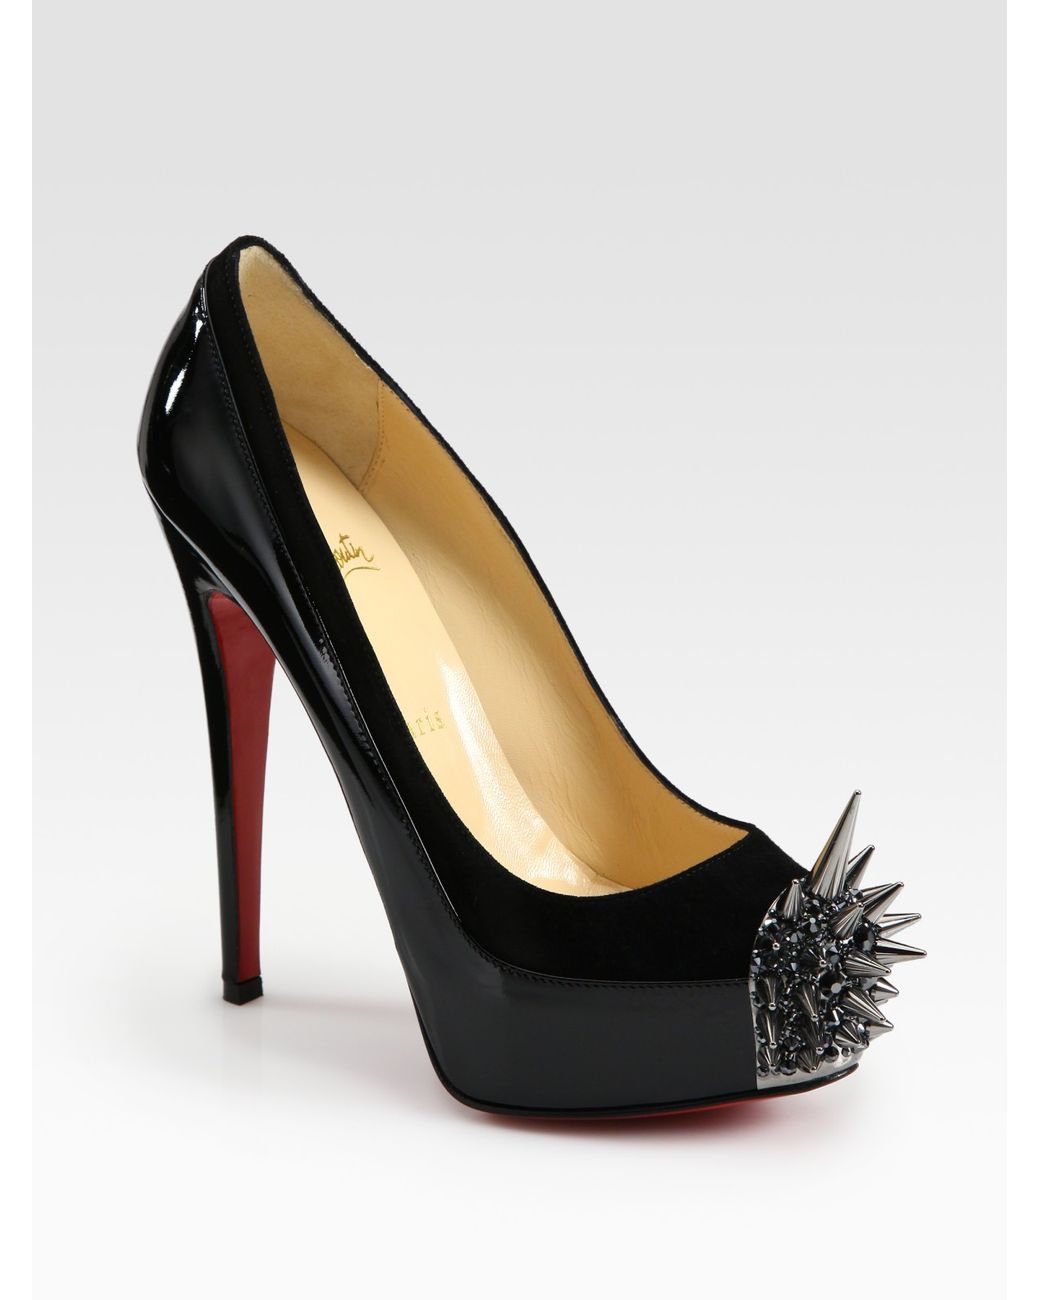 Christian Louboutin Asteroid Suede and Patent Leather Spike Pumps in Black  | Lyst